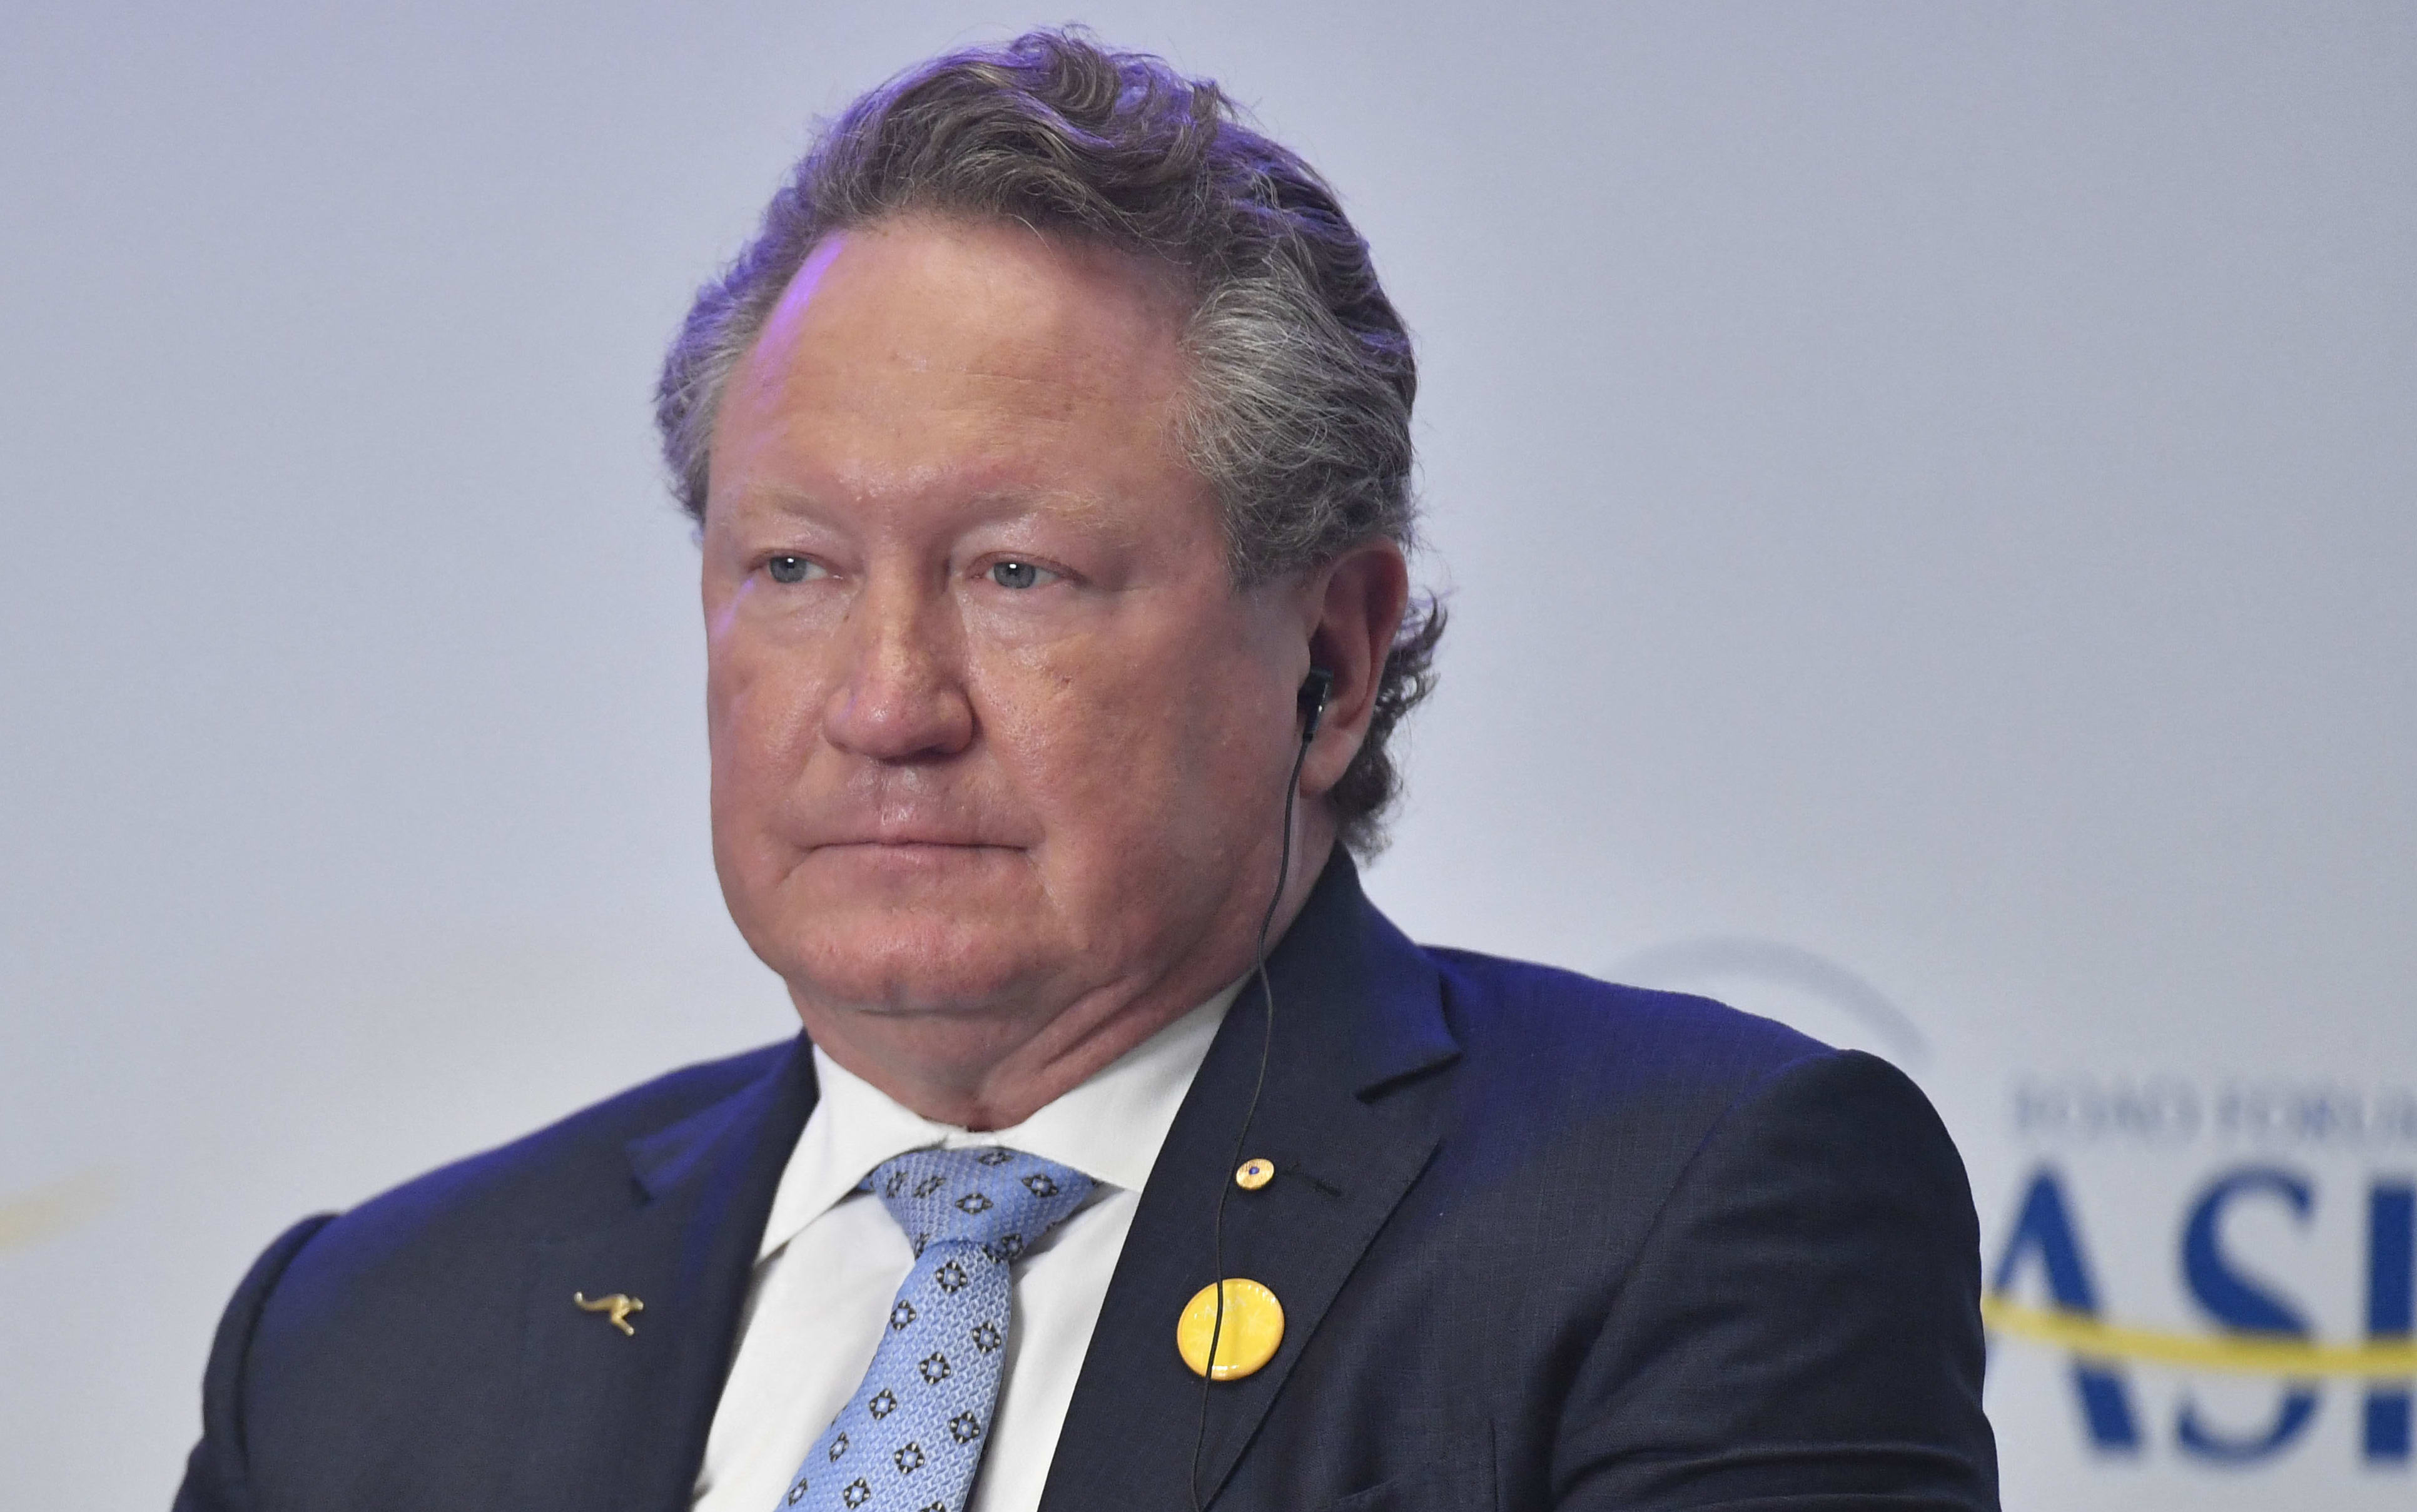 Fortescue Metals Group chairperson Andrew Forrest on 27 March 2019.